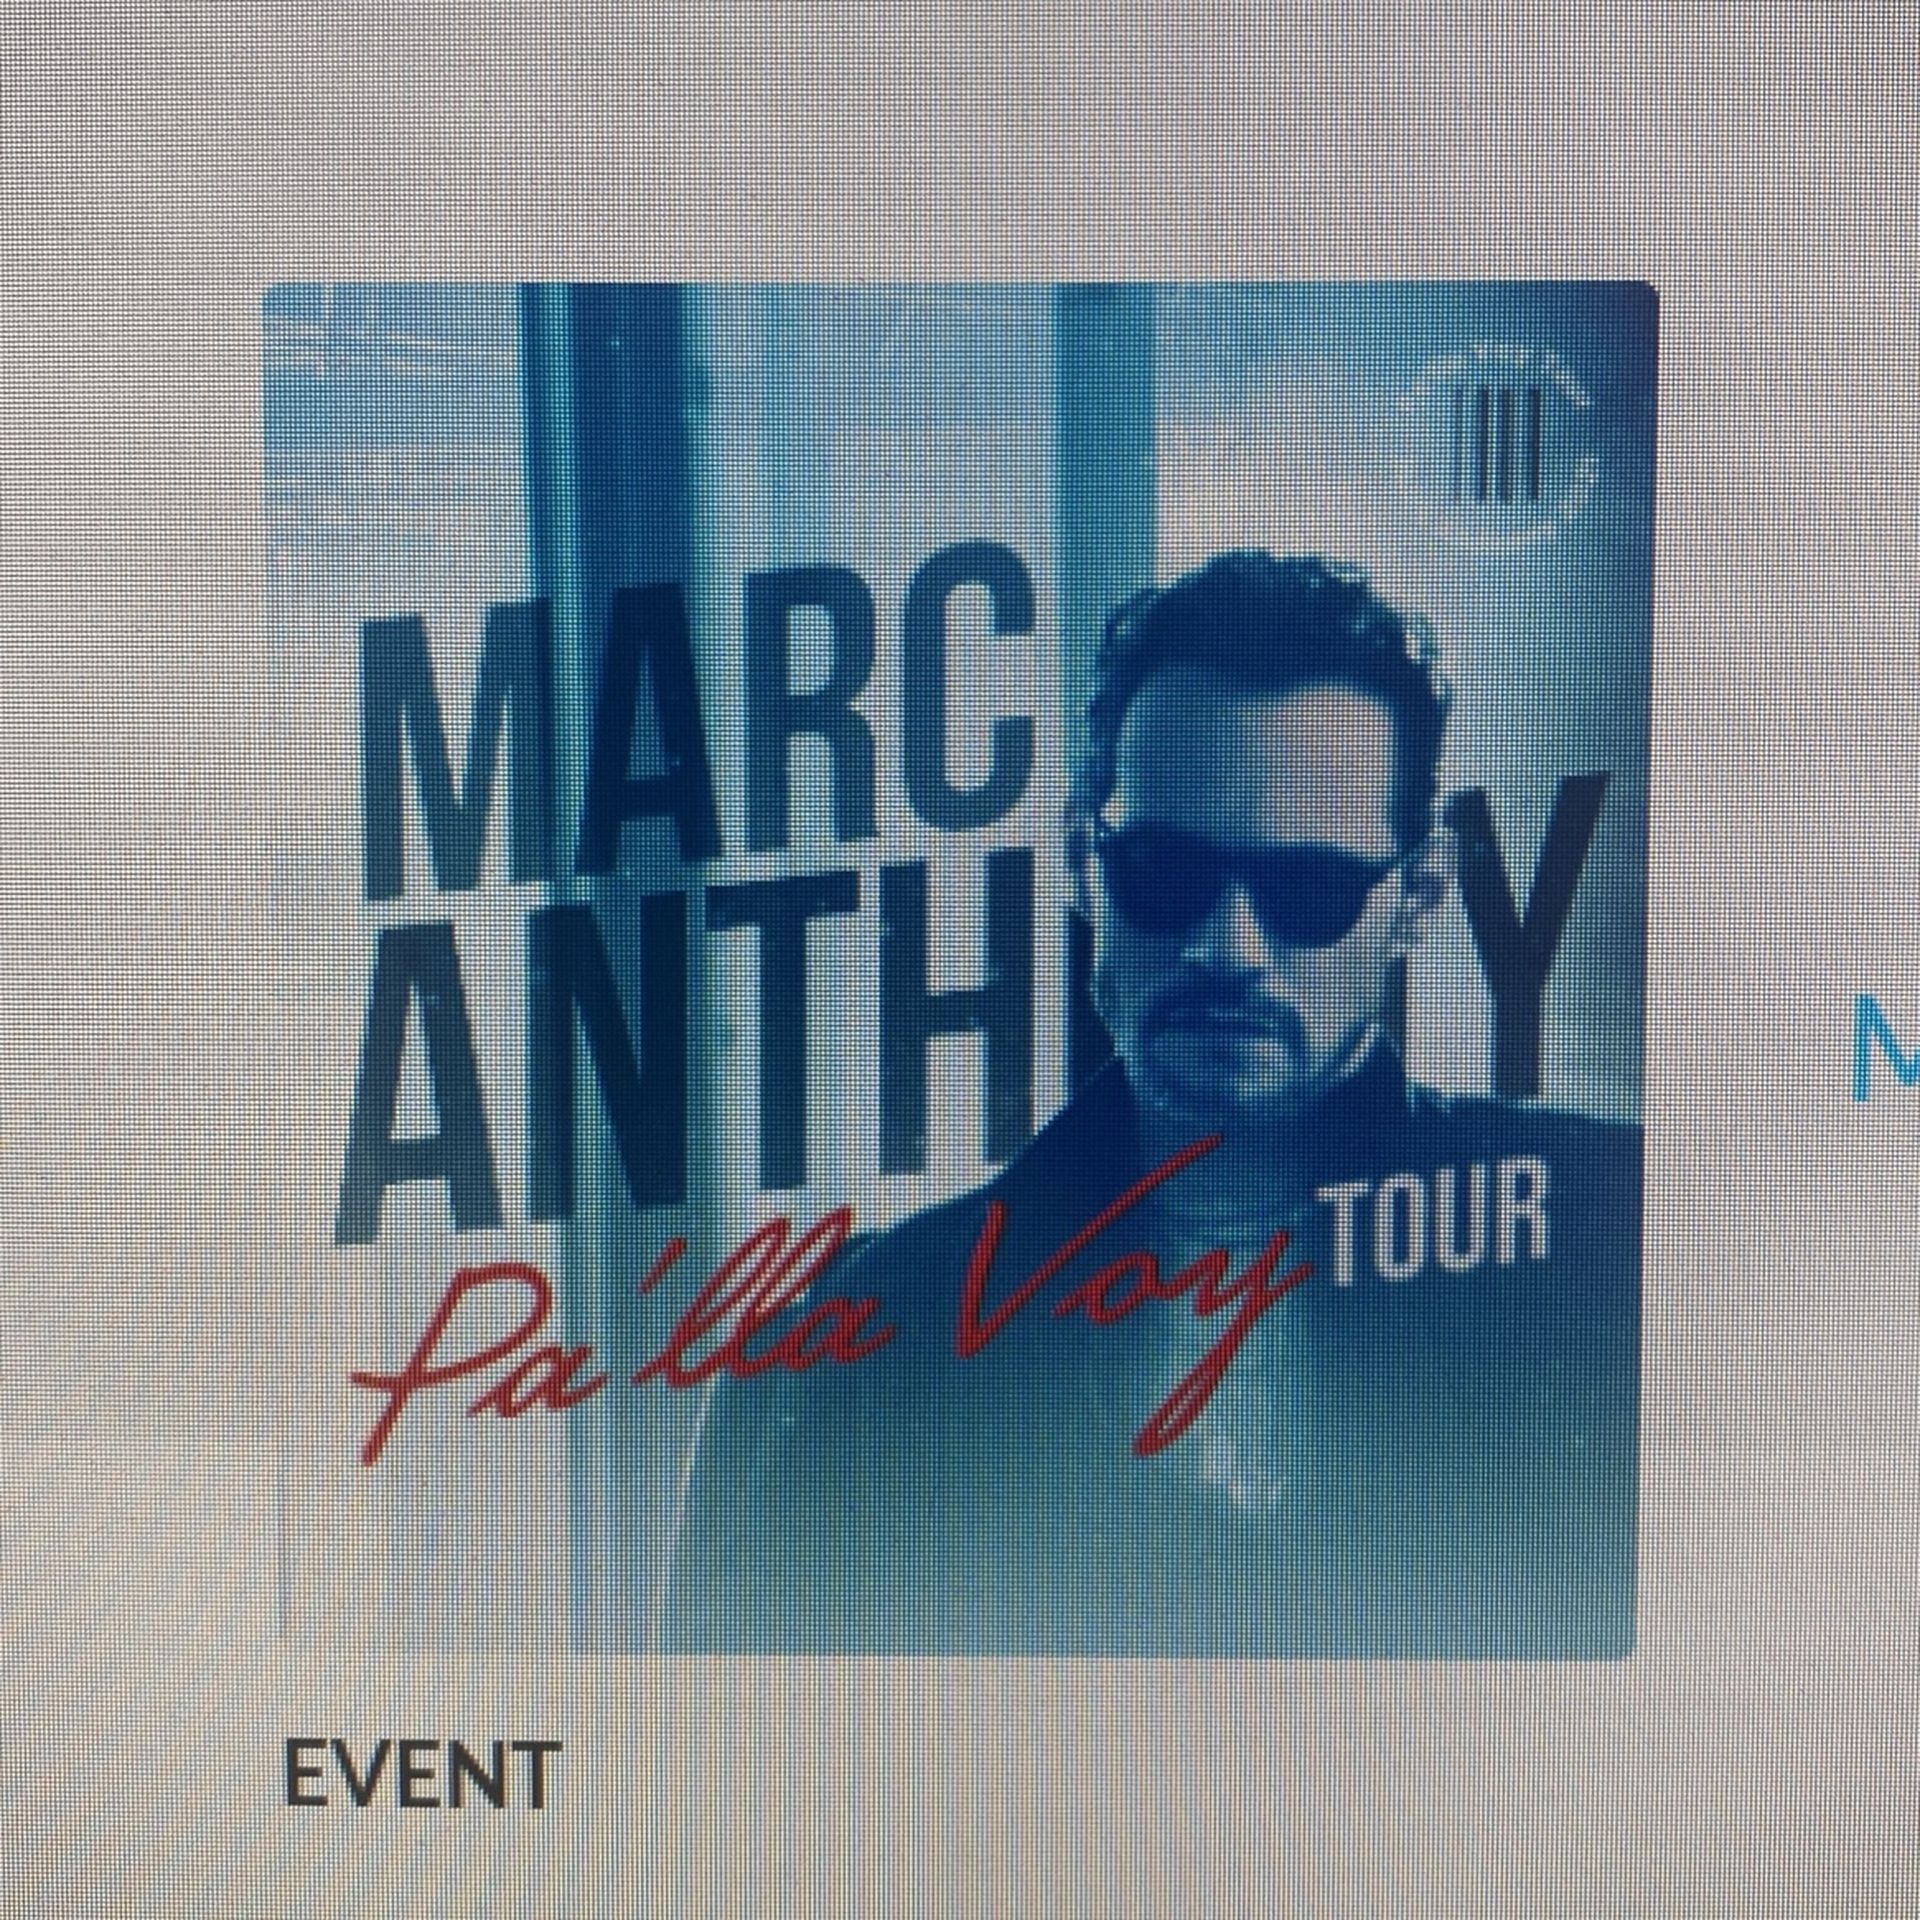 Marc Anthony Tickets For Sale 11/19 @ 8pm